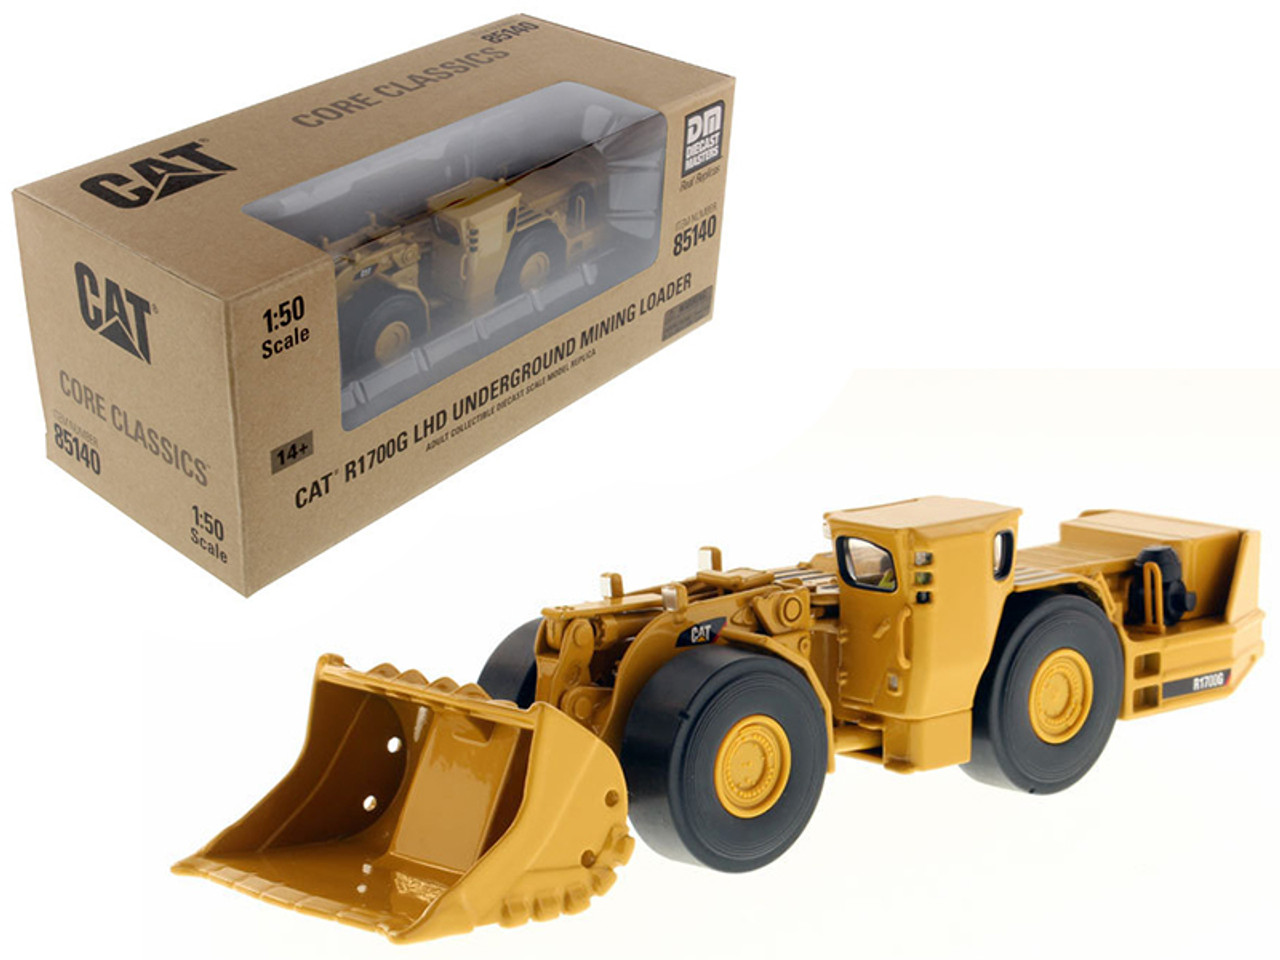 CAT Caterpillar R1700G Underground Mining Loader with Operator "Core Classics" Series 1/50 Diecast Model by Diecast Masters